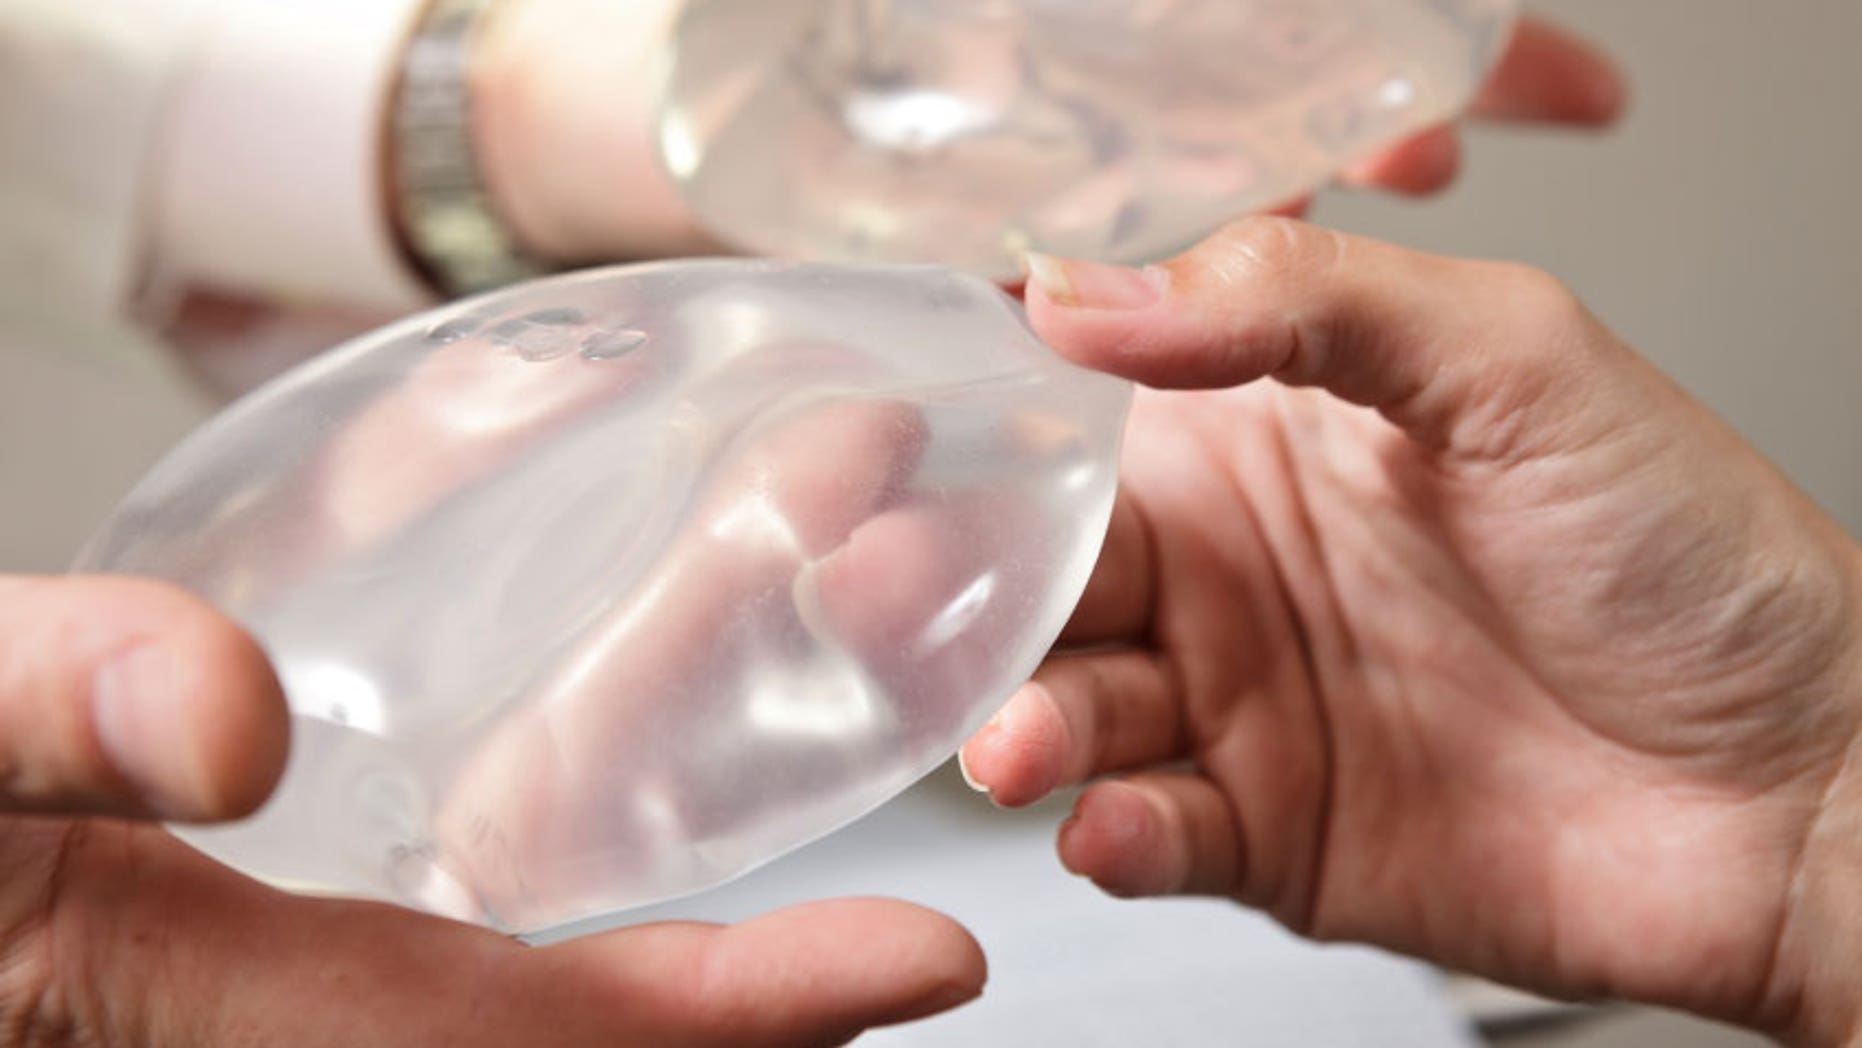 Misshapen Breasts - Why thousands of women are having their breast implants ...